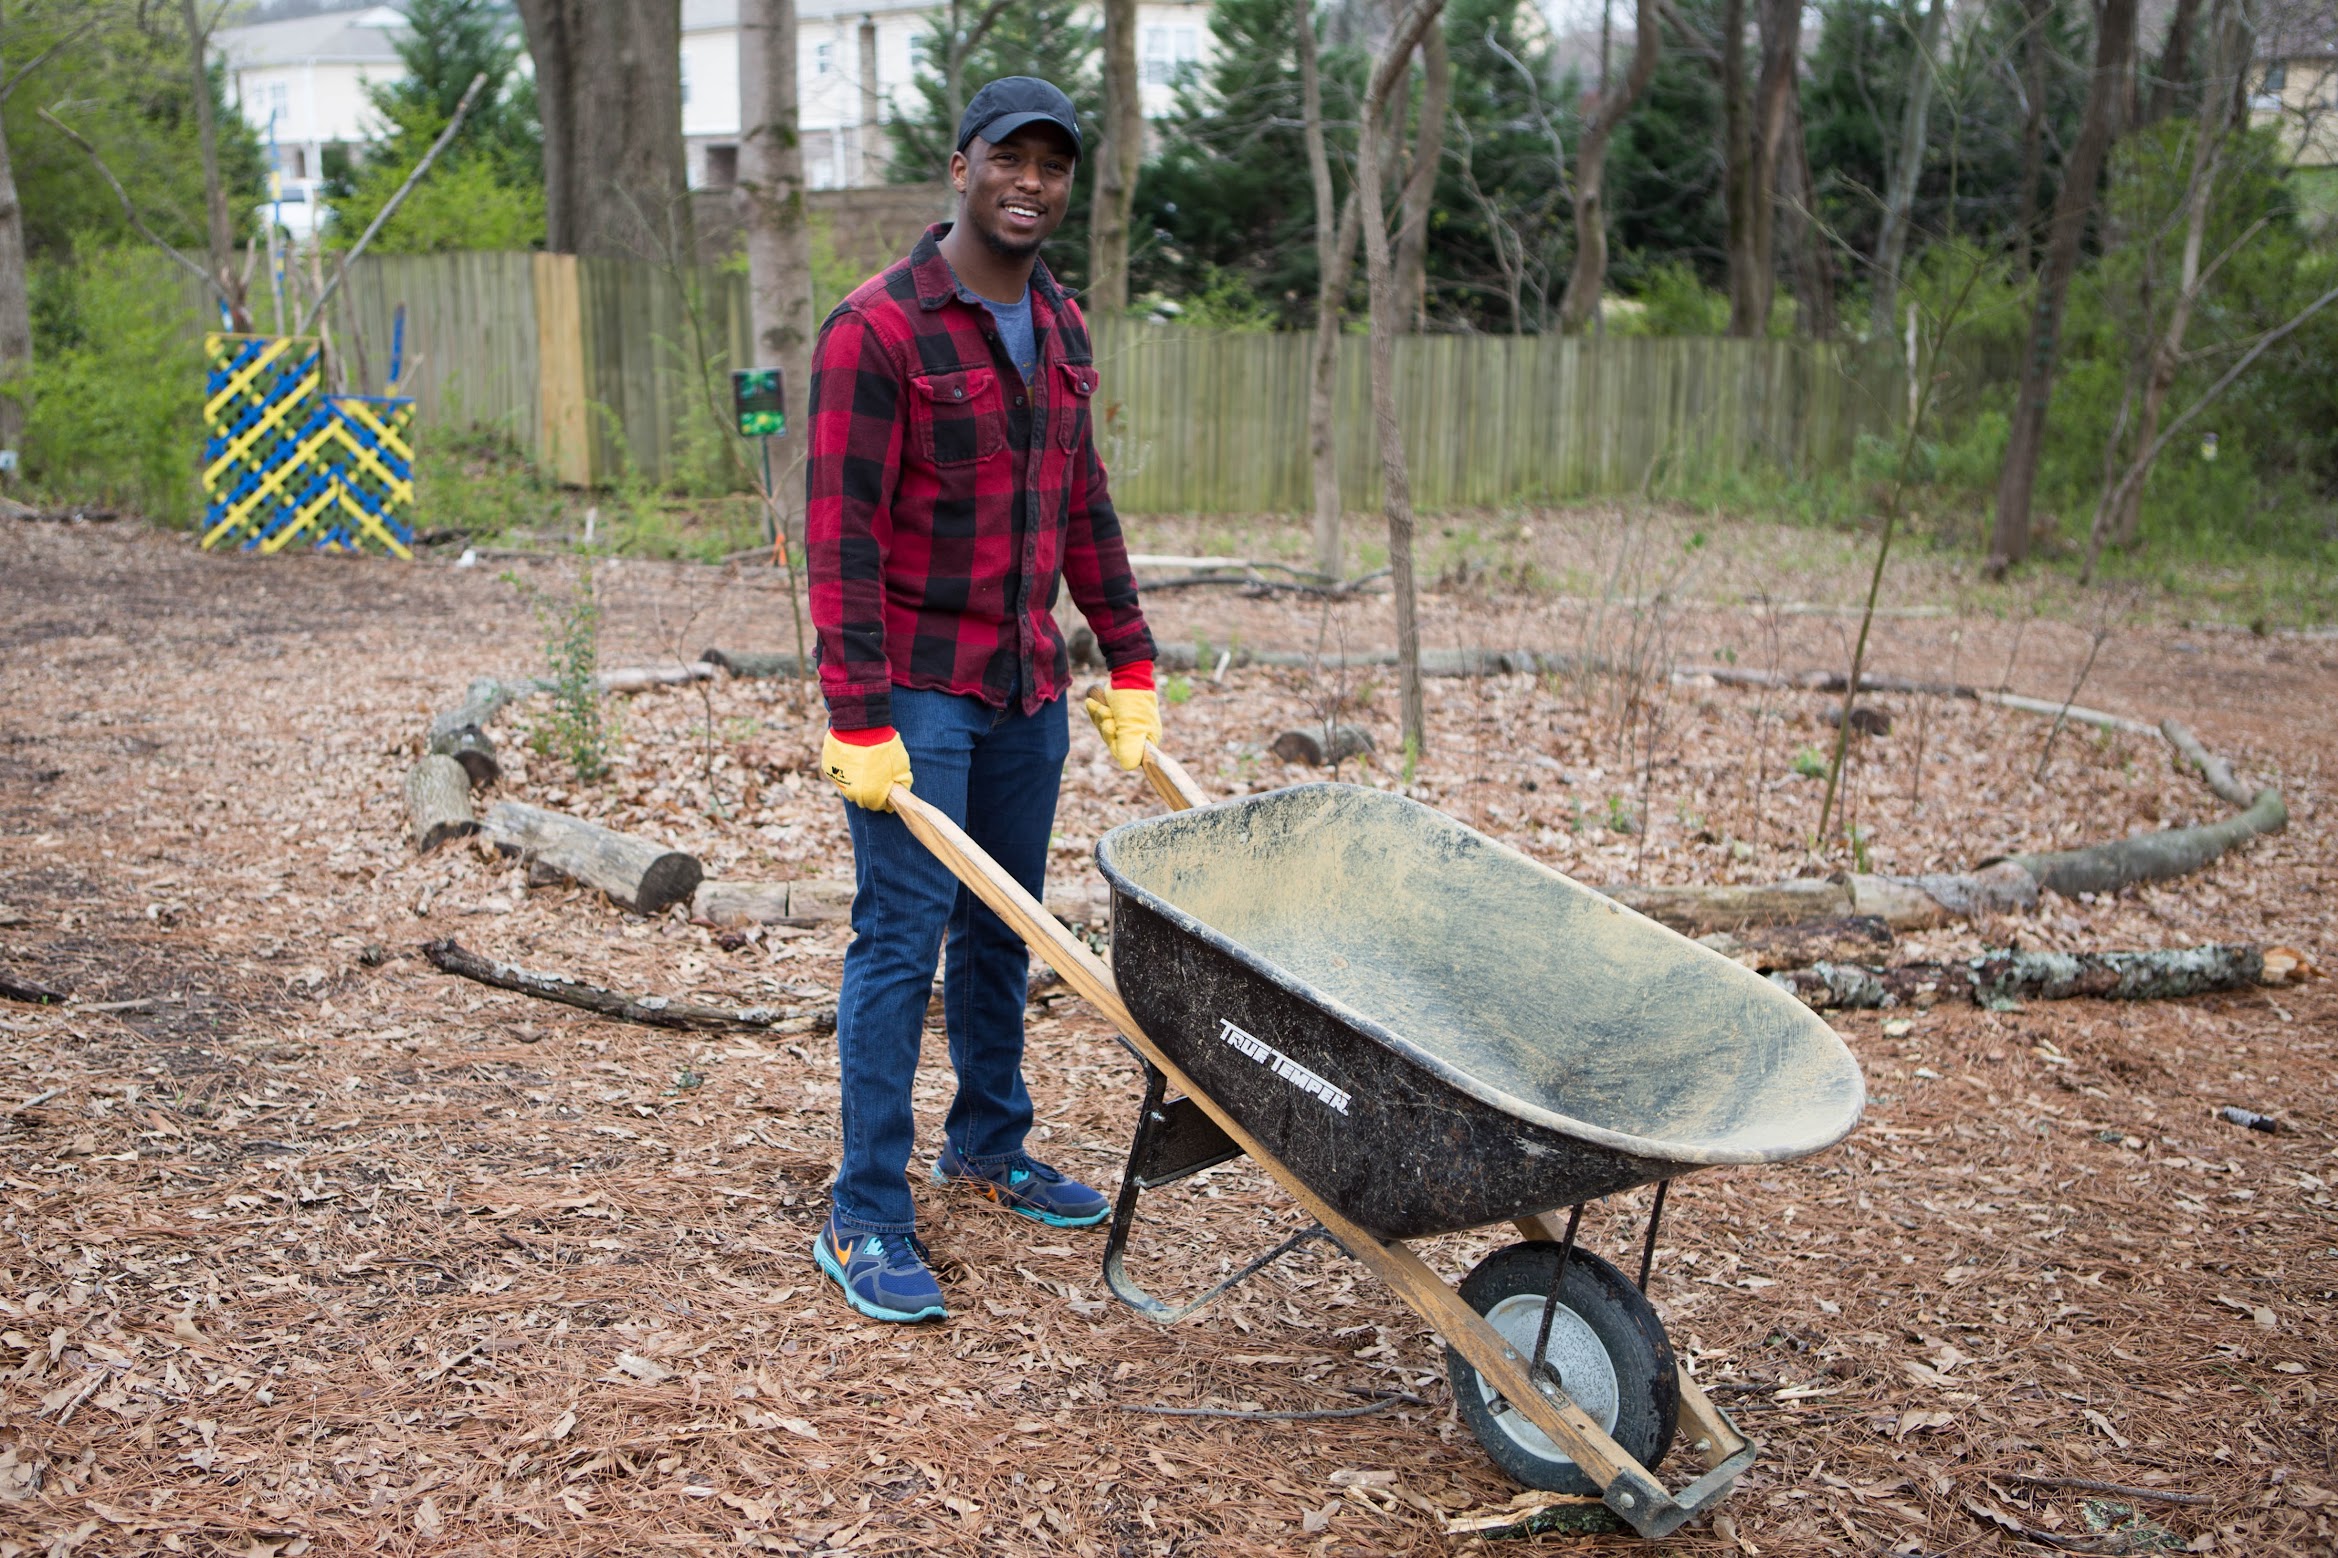 A man with a wheelbarrow in a wooded area during spring break.